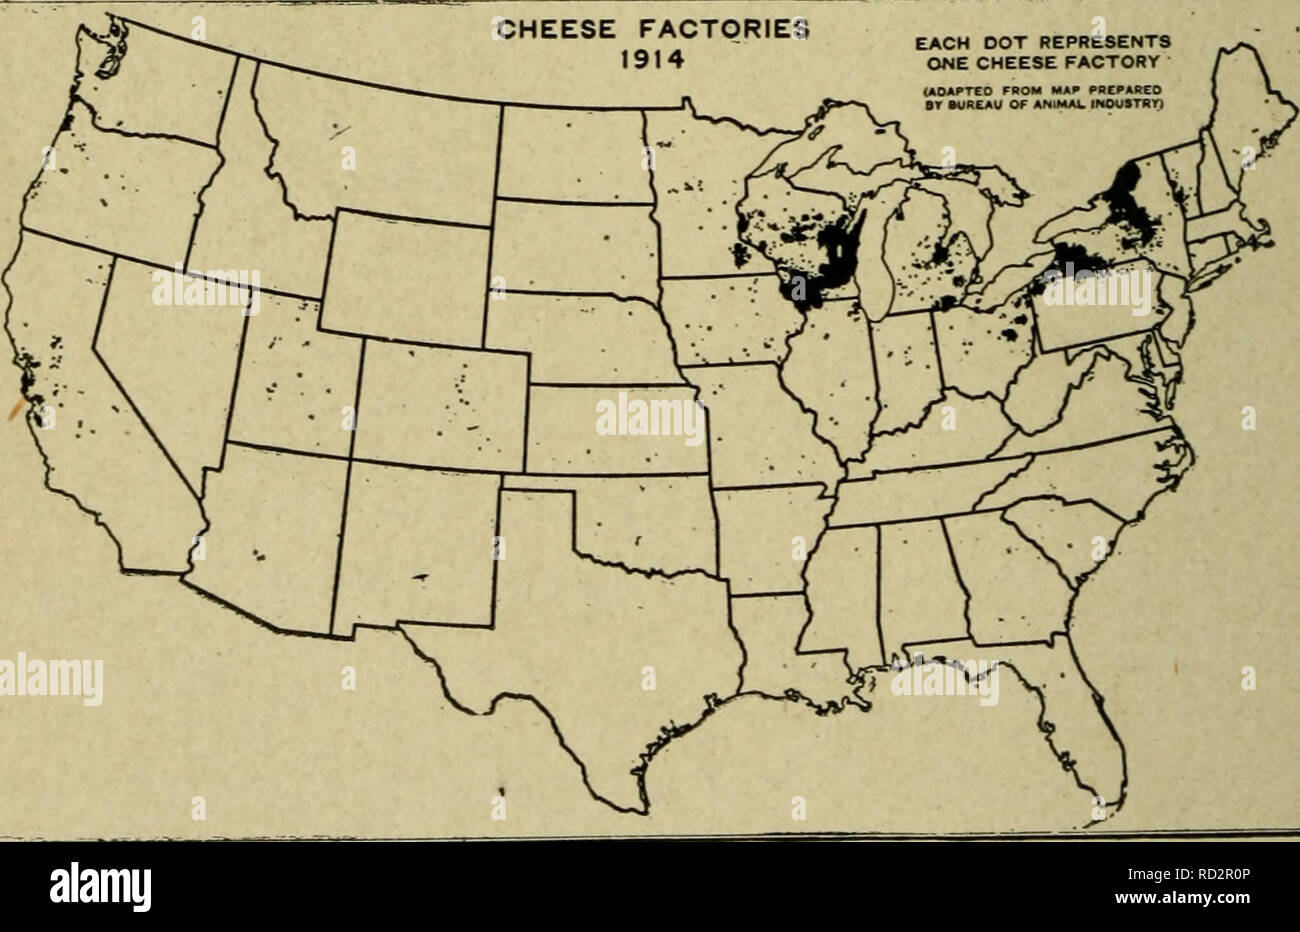 . Dairy farming. Dairying; Cattle. 212 DAIRY FARMING period. There is no reason to suppose that any other state will be a close competitor with Wisconsin in cheese production. Table 25. — Pounds Butter and Cheese made on Farms AND IN Factories^ Butter Cheese 1899 1909 Per Cent Increase 1899 1909 Per Cent Increase New York Wisconsin Minnesota 115,408,222 106,552,649 82,363,315 69,358,918 131,085,193 123,551,515 -40 23 50 130.010,584 79,384,298 105,584,947 148.906,910 -19 88 These declines in New York do not mean that the dairy business has declined; They merely show that the readily. Fig. 72. — Stock Photo